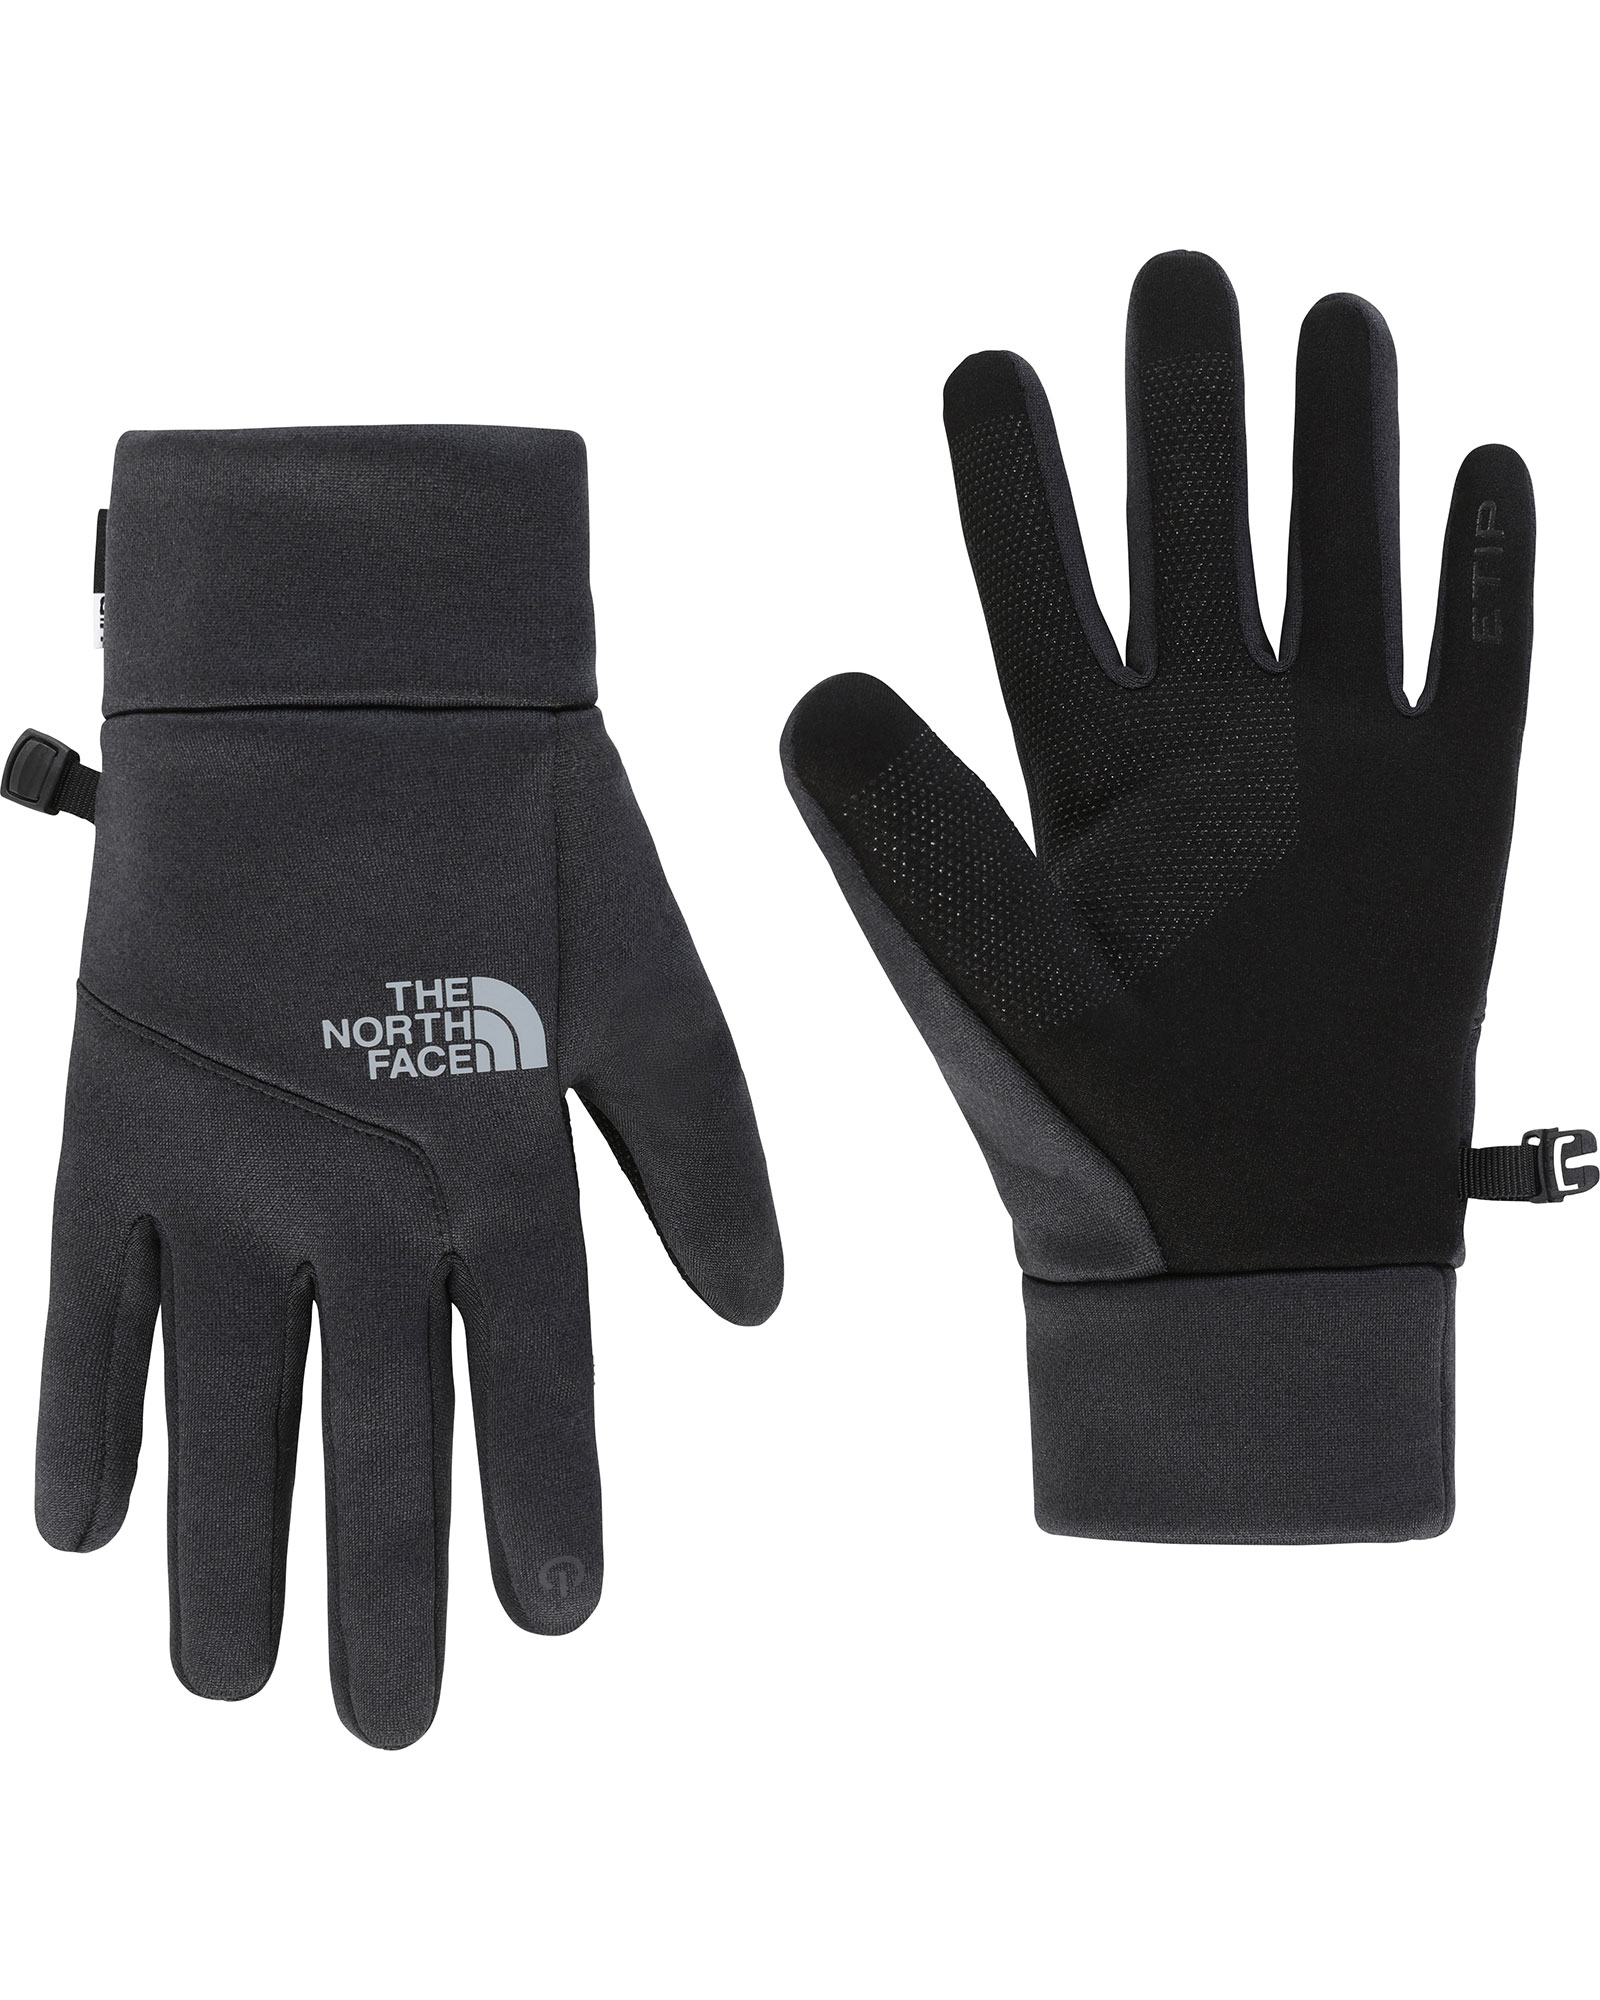 The North Face Etip Hardface Women’s Gloves - TNF Black Heather L